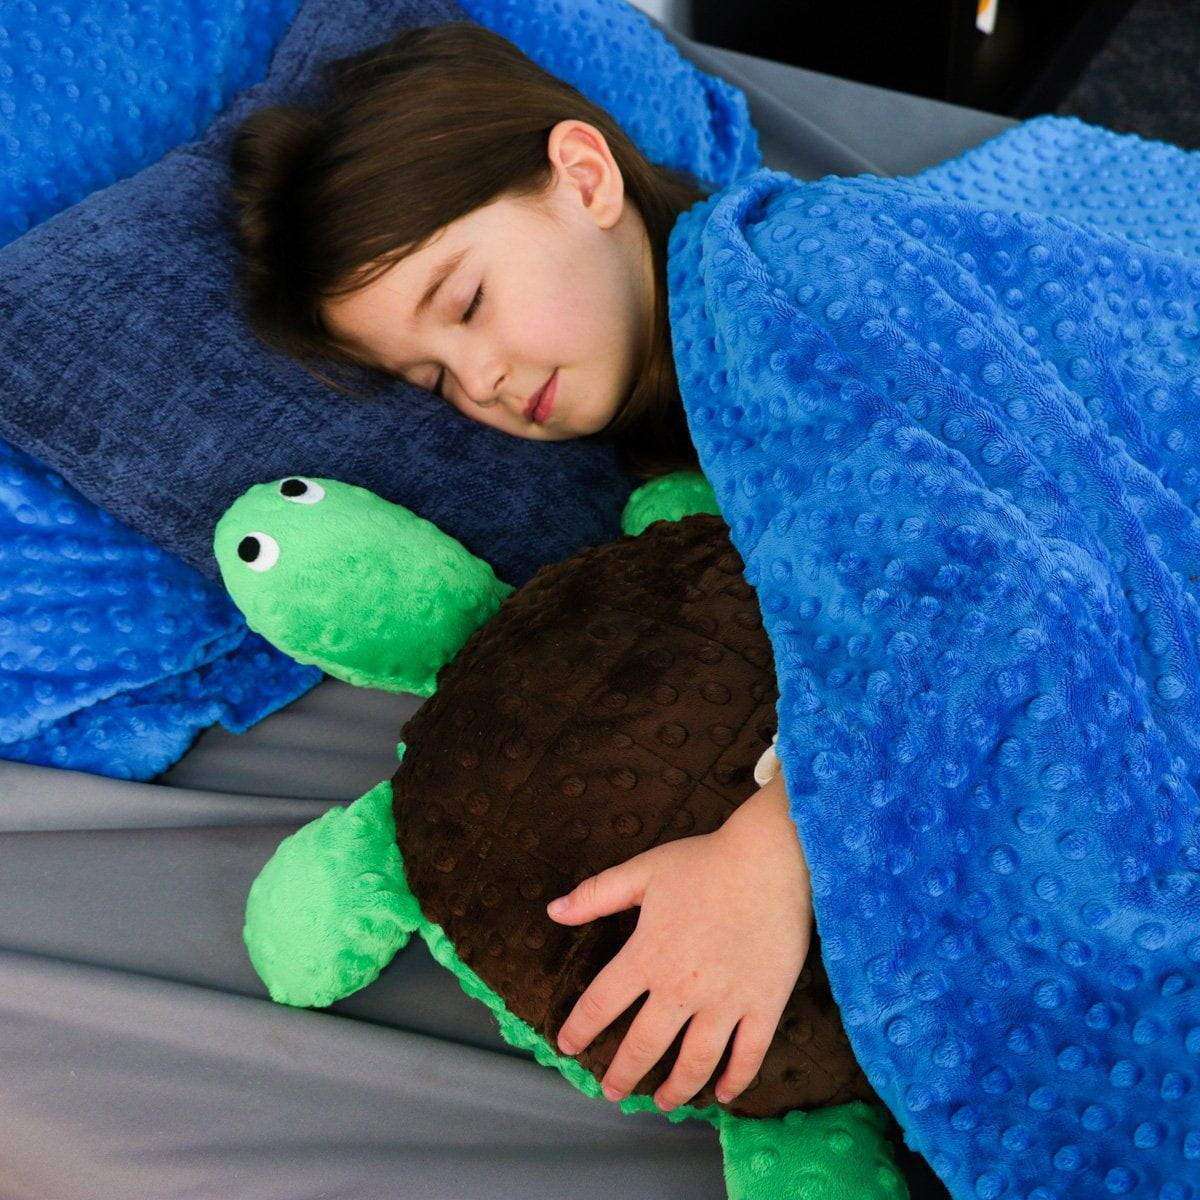 Peaceful Pals - Calvin the Weighted Calming Turtle